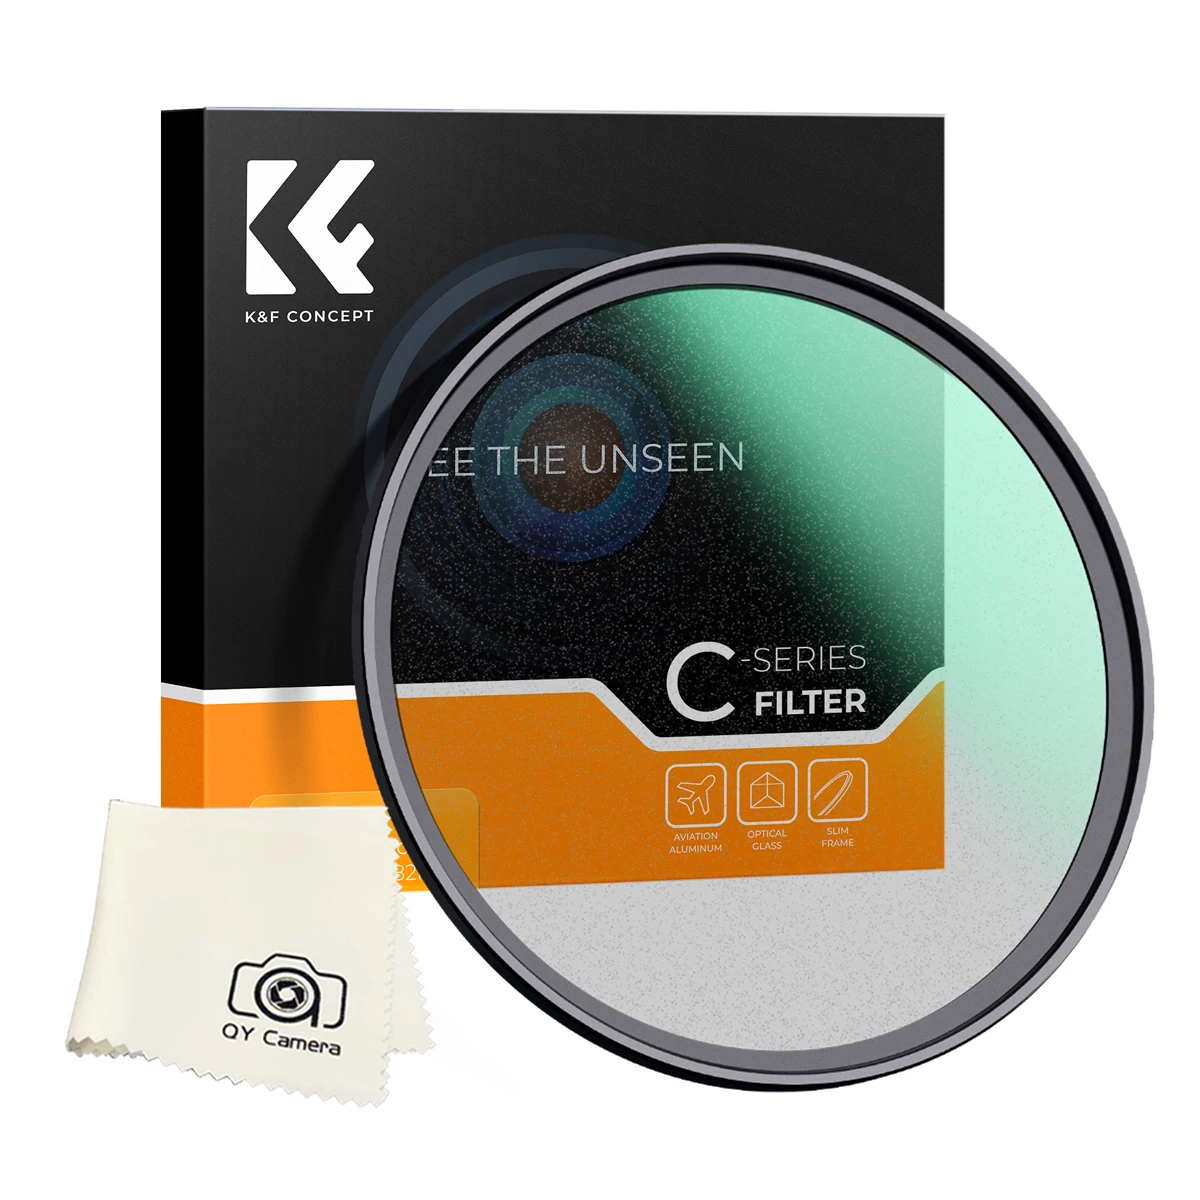 

K&F Concept Lens Diffusion Filter 49mm 1/1 Black Pro Mist Antireflective Coating Sony 50mm f/1.8 E C Series